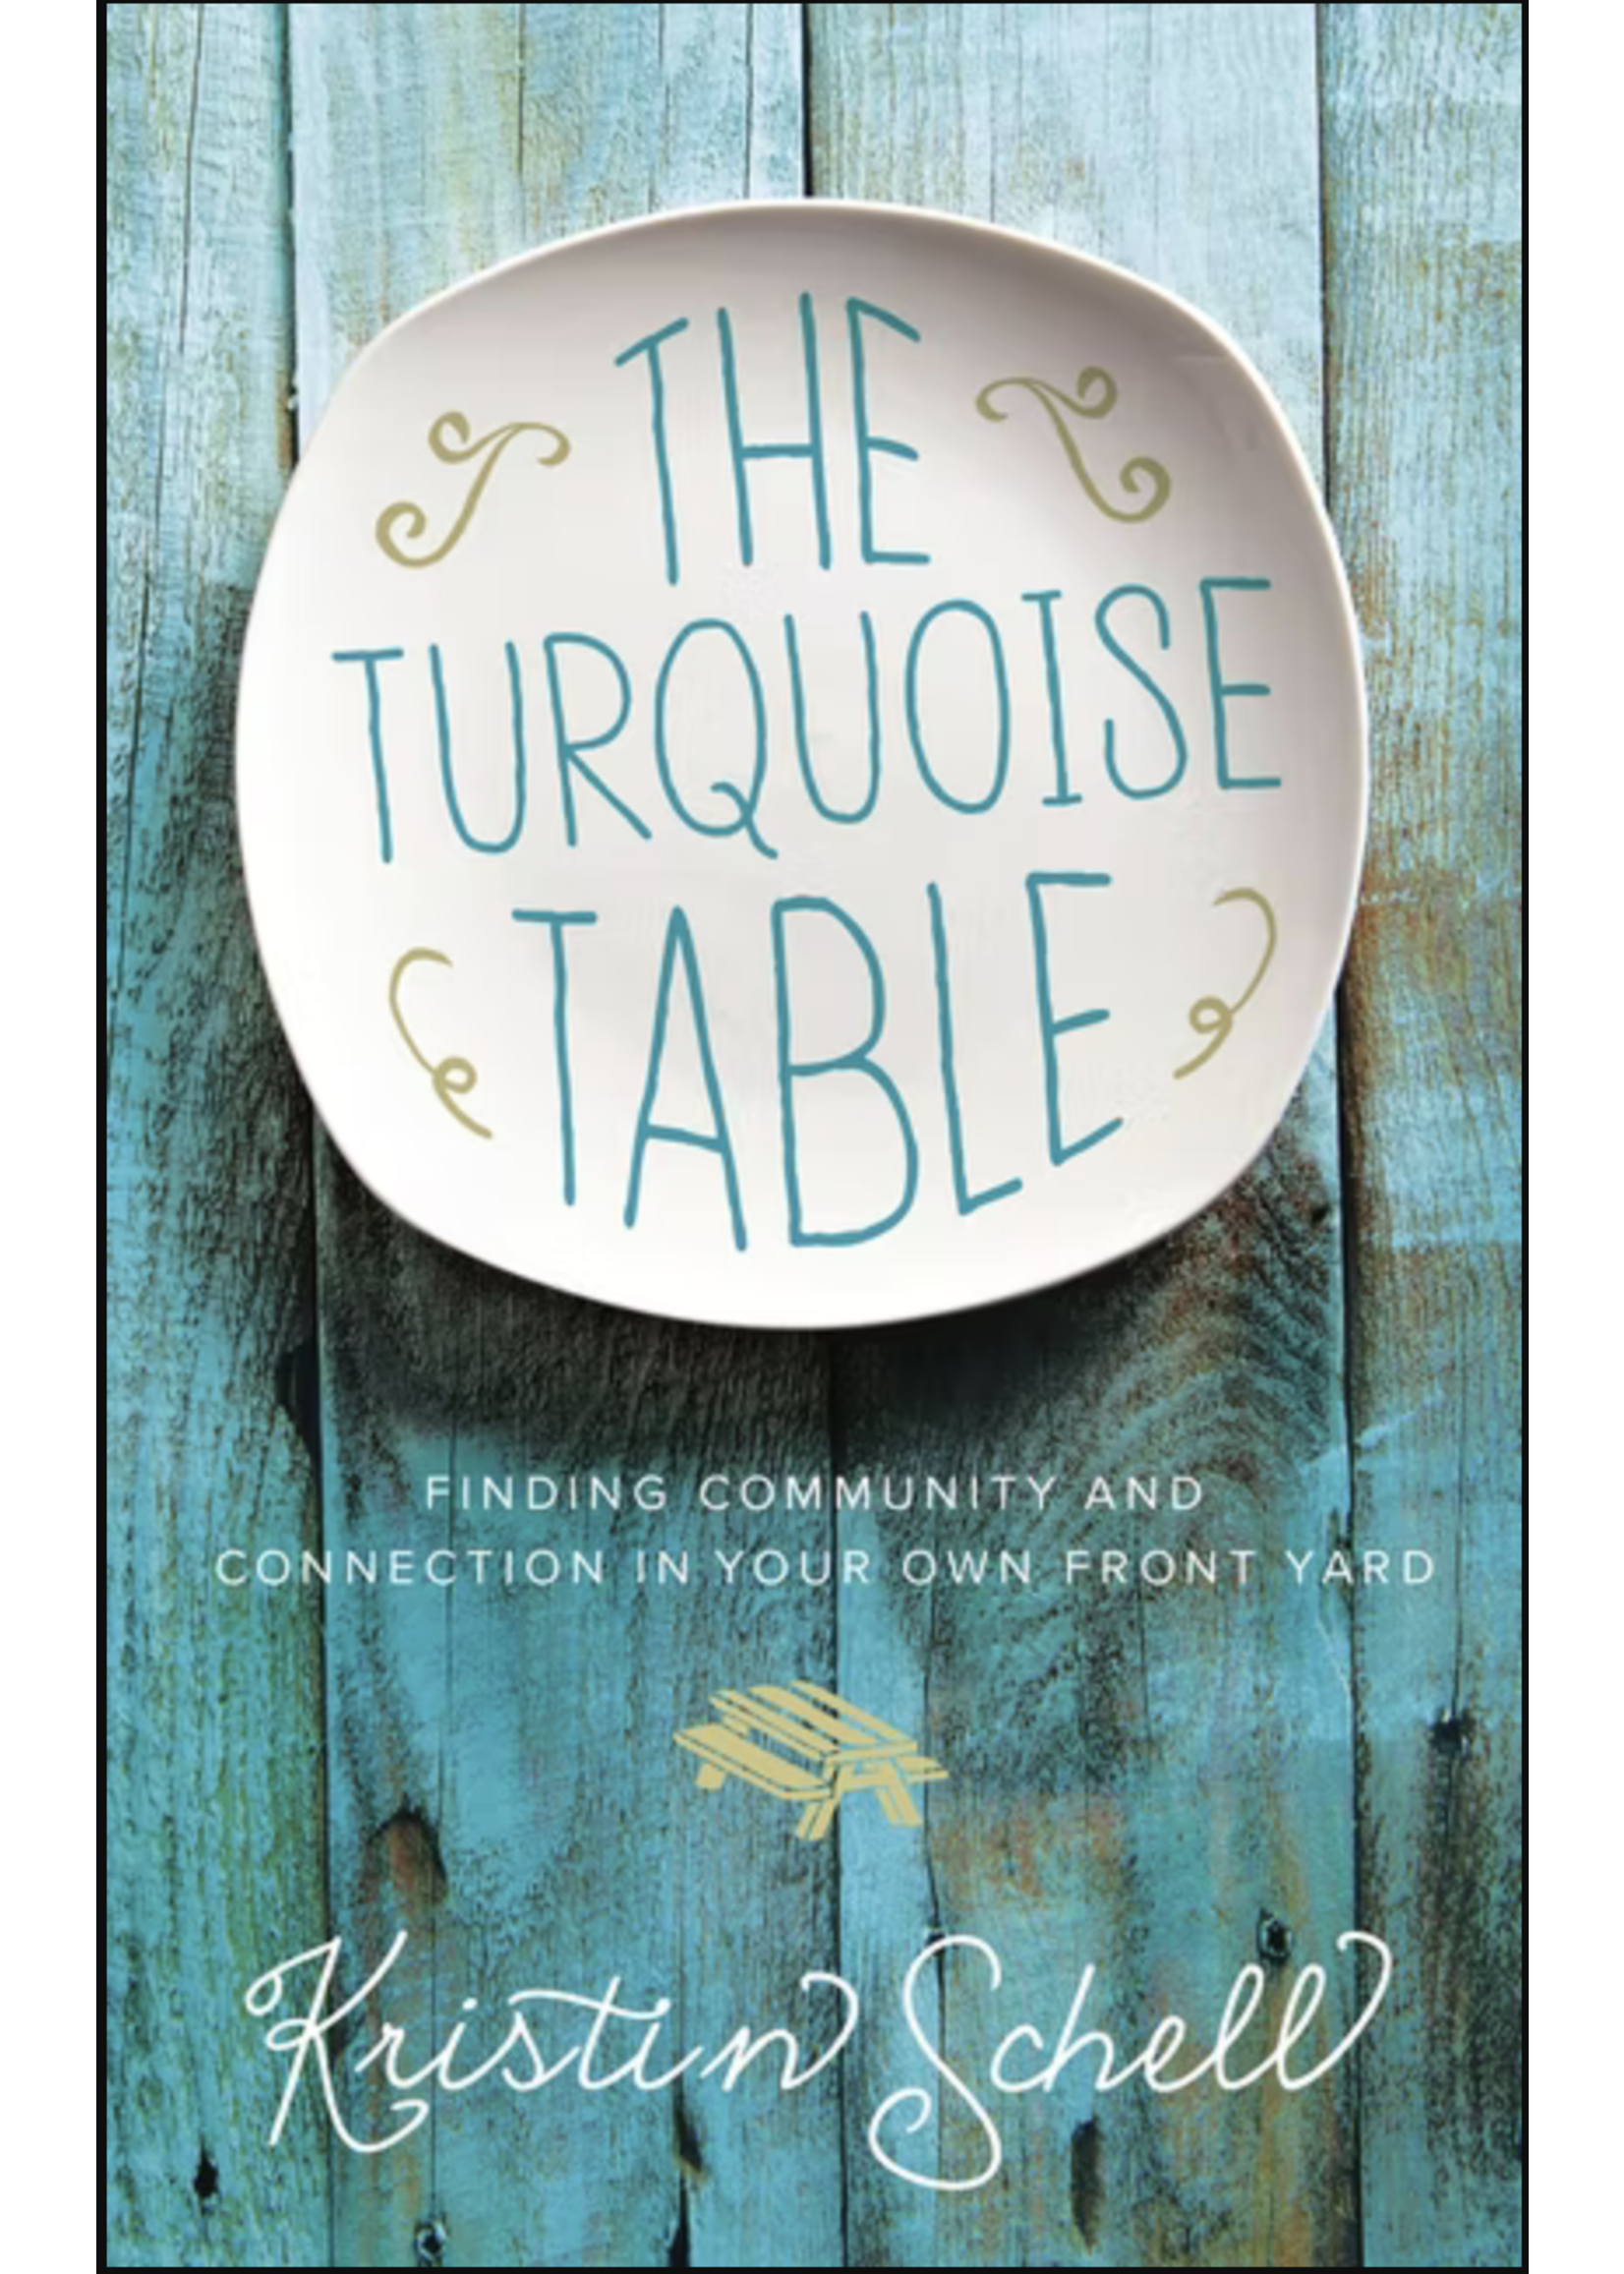 archived The Turquoise Table: Finding Community and Connection in Your Own Front Yard